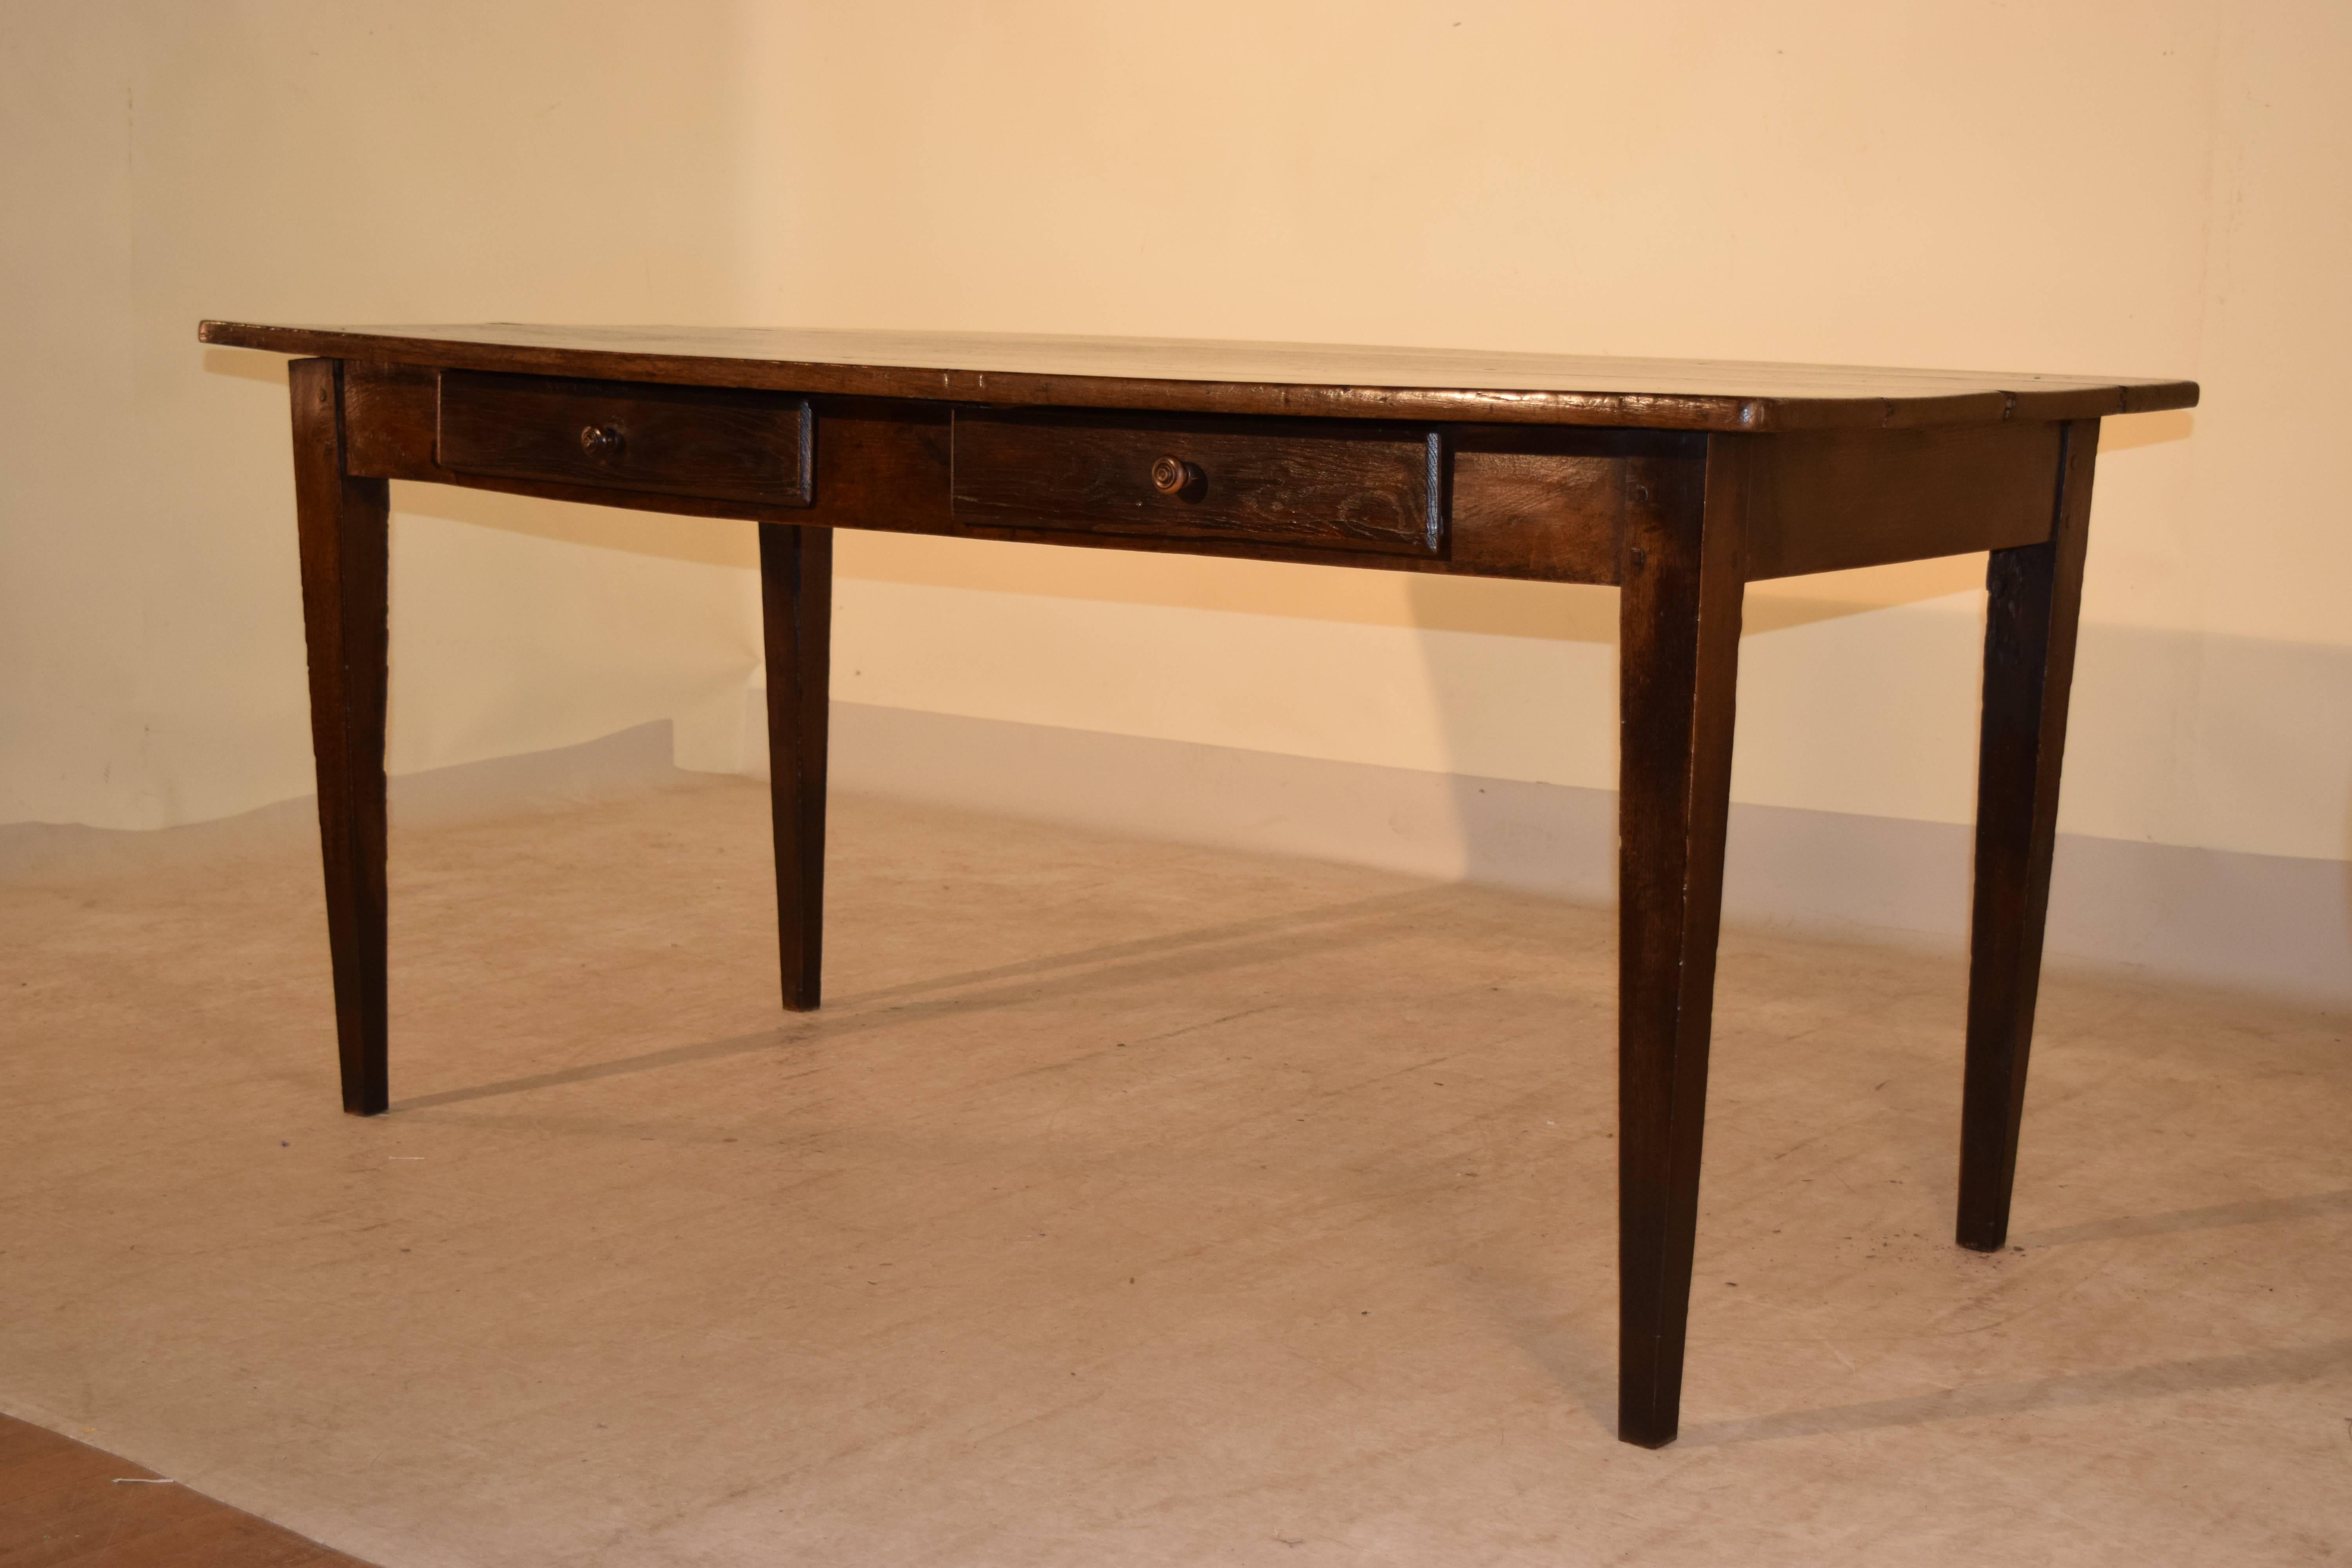 Rustic Early 19th Century French Chestnut Farm Table